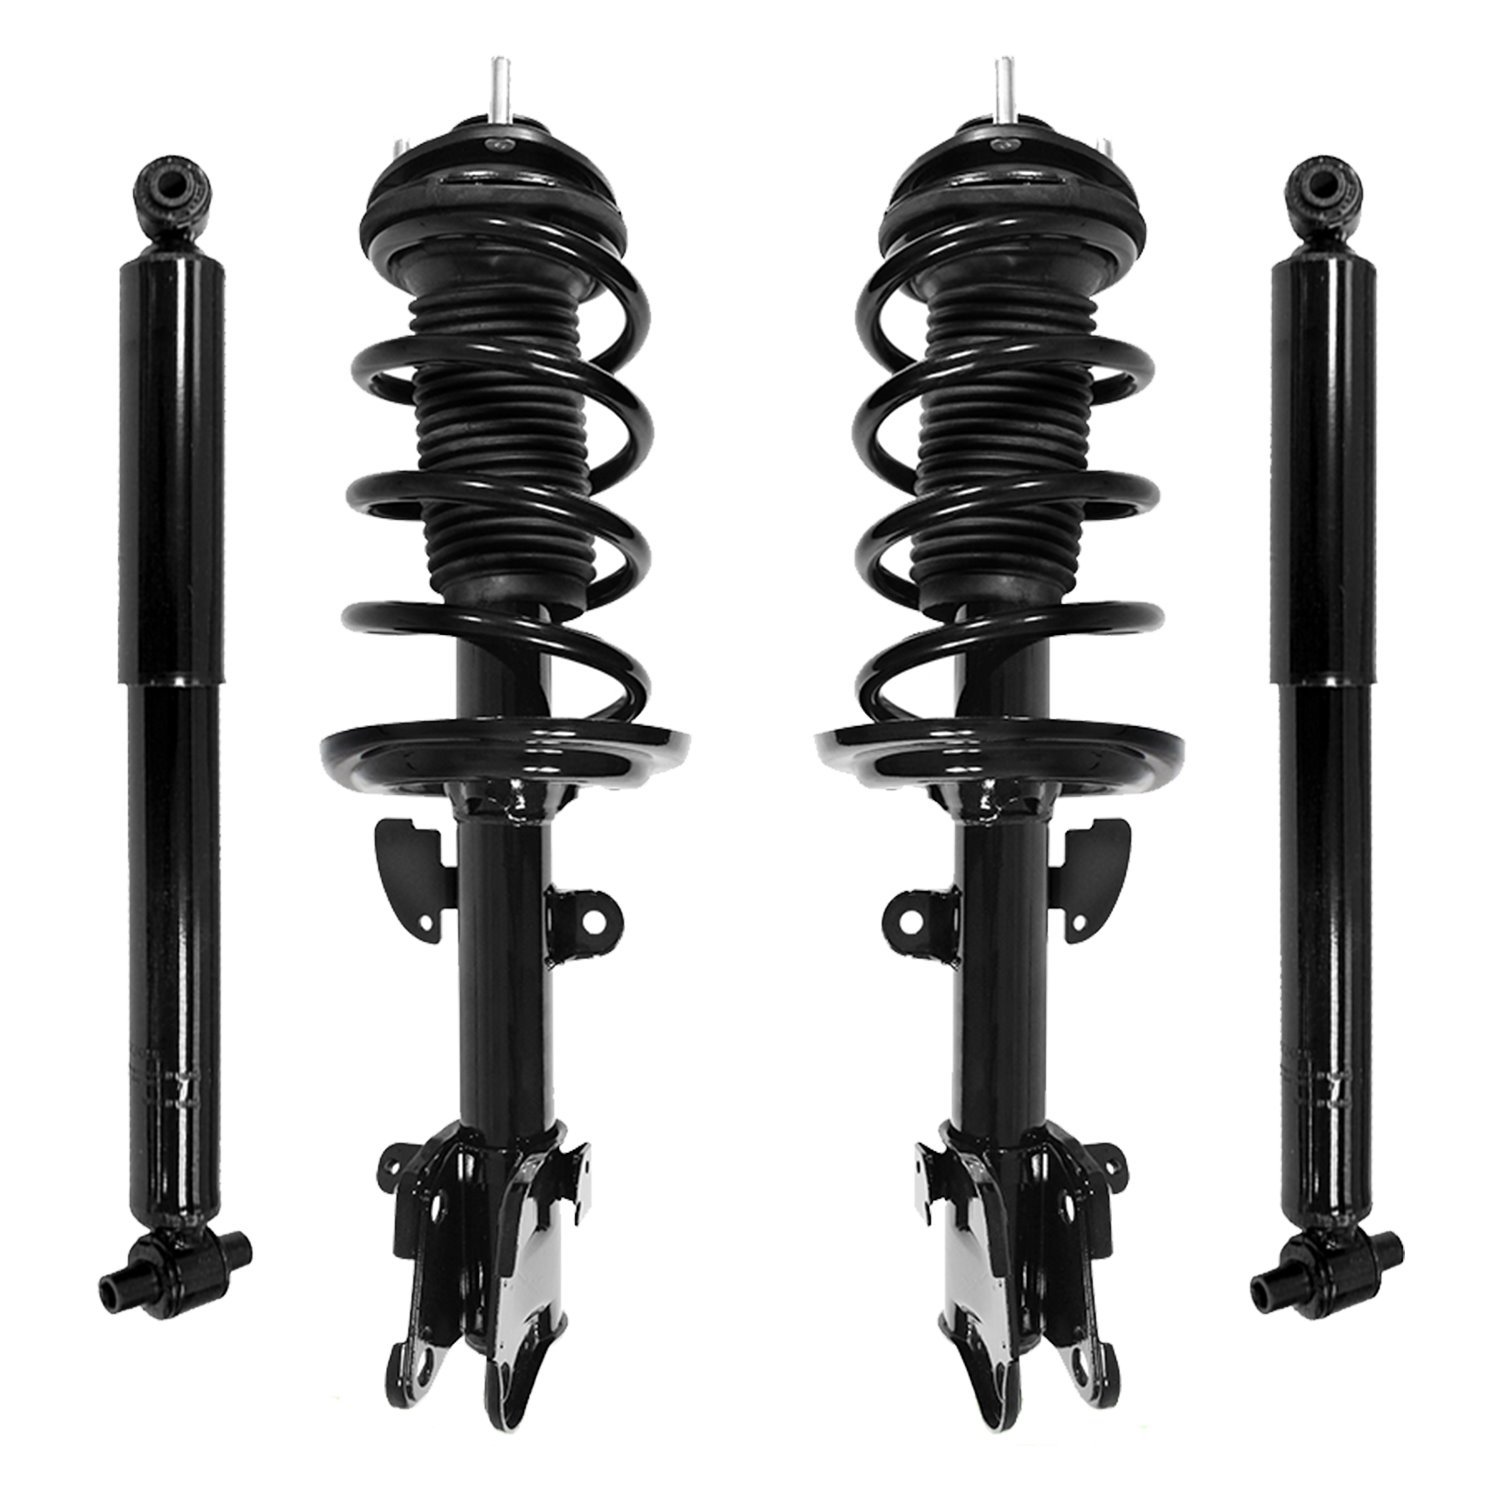 4-11713-259110-001 Front & Rear Suspension Strut & Coil Spring Assembly Fits Select Acura ZDX, Acura MDX